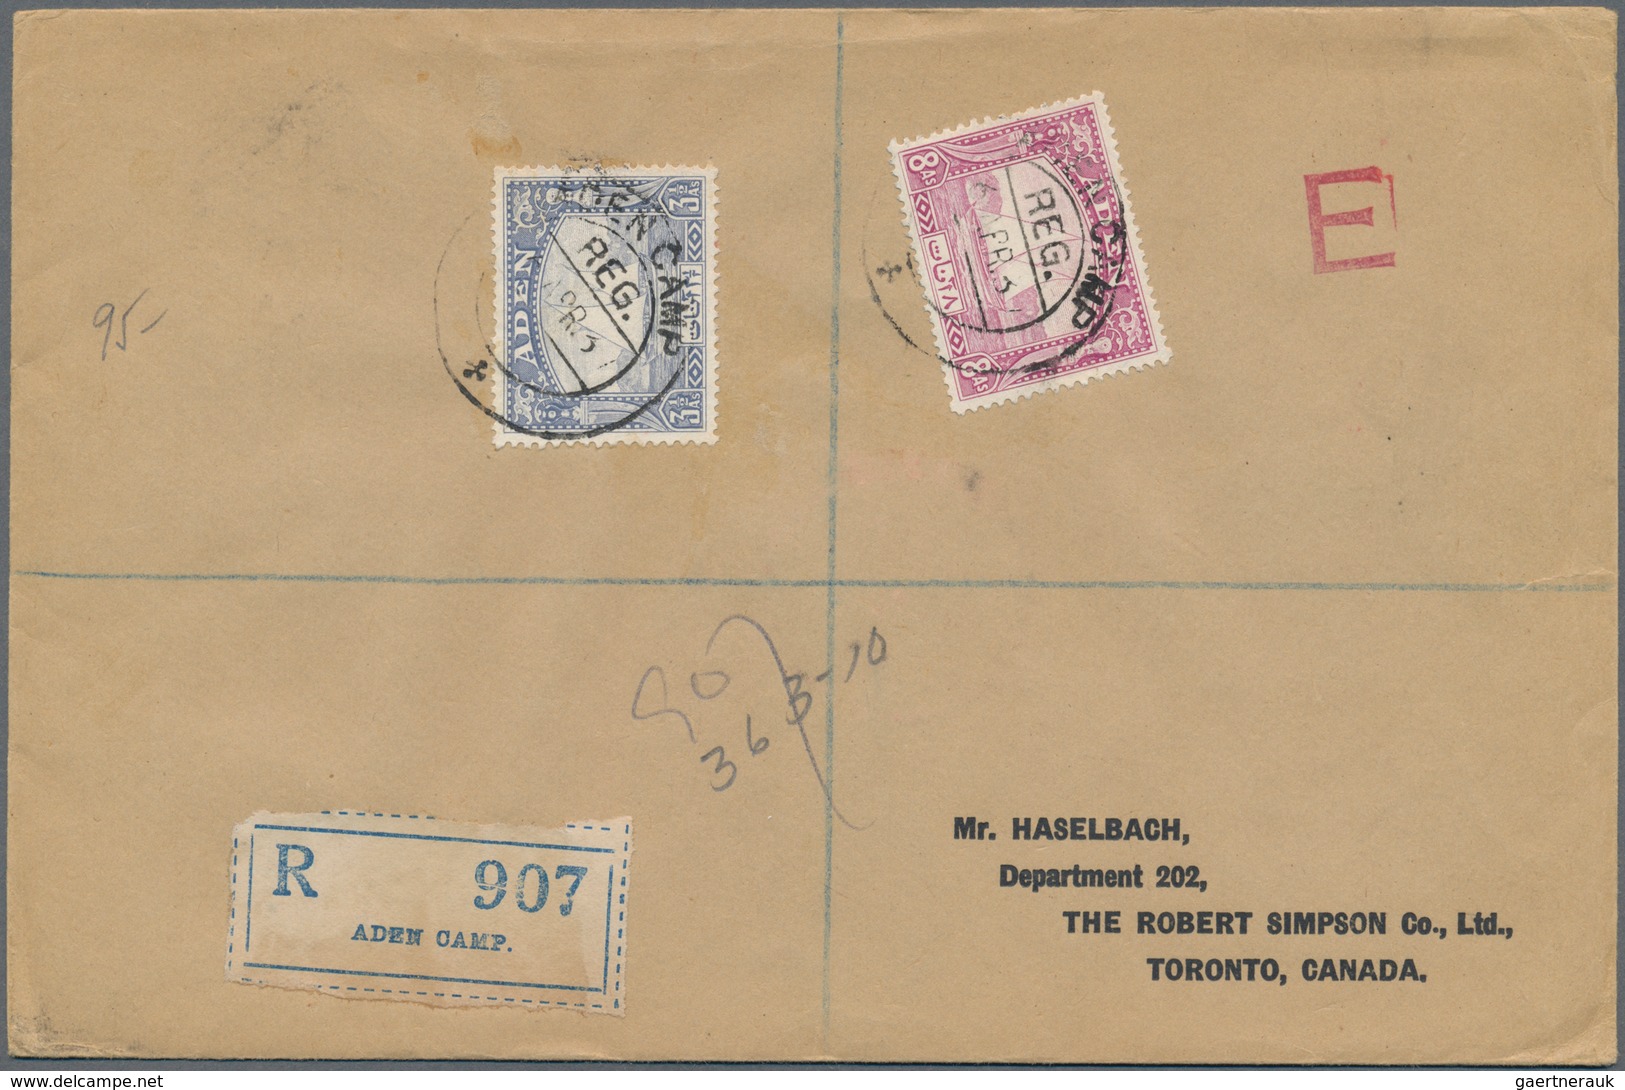 08005 Aden: 1937 Registered Cover From Aden-Camp To Toronto, CANADA Franked By Dhows 3½a. And 8a. Tied By - Jemen